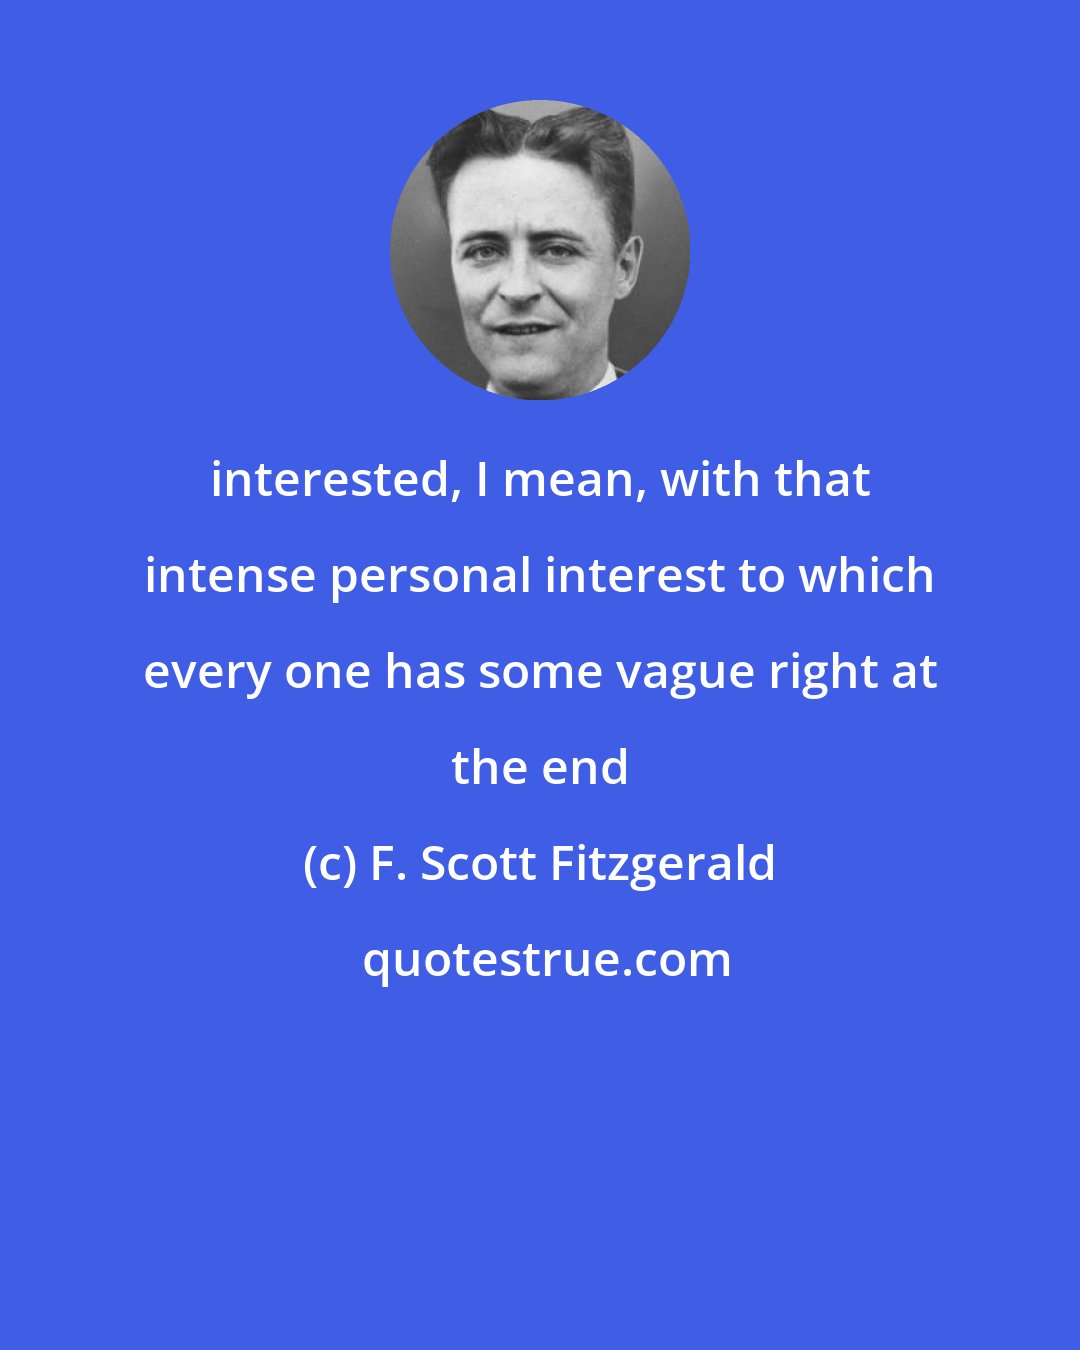 F. Scott Fitzgerald: interested, I mean, with that intense personal interest to which every one has some vague right at the end